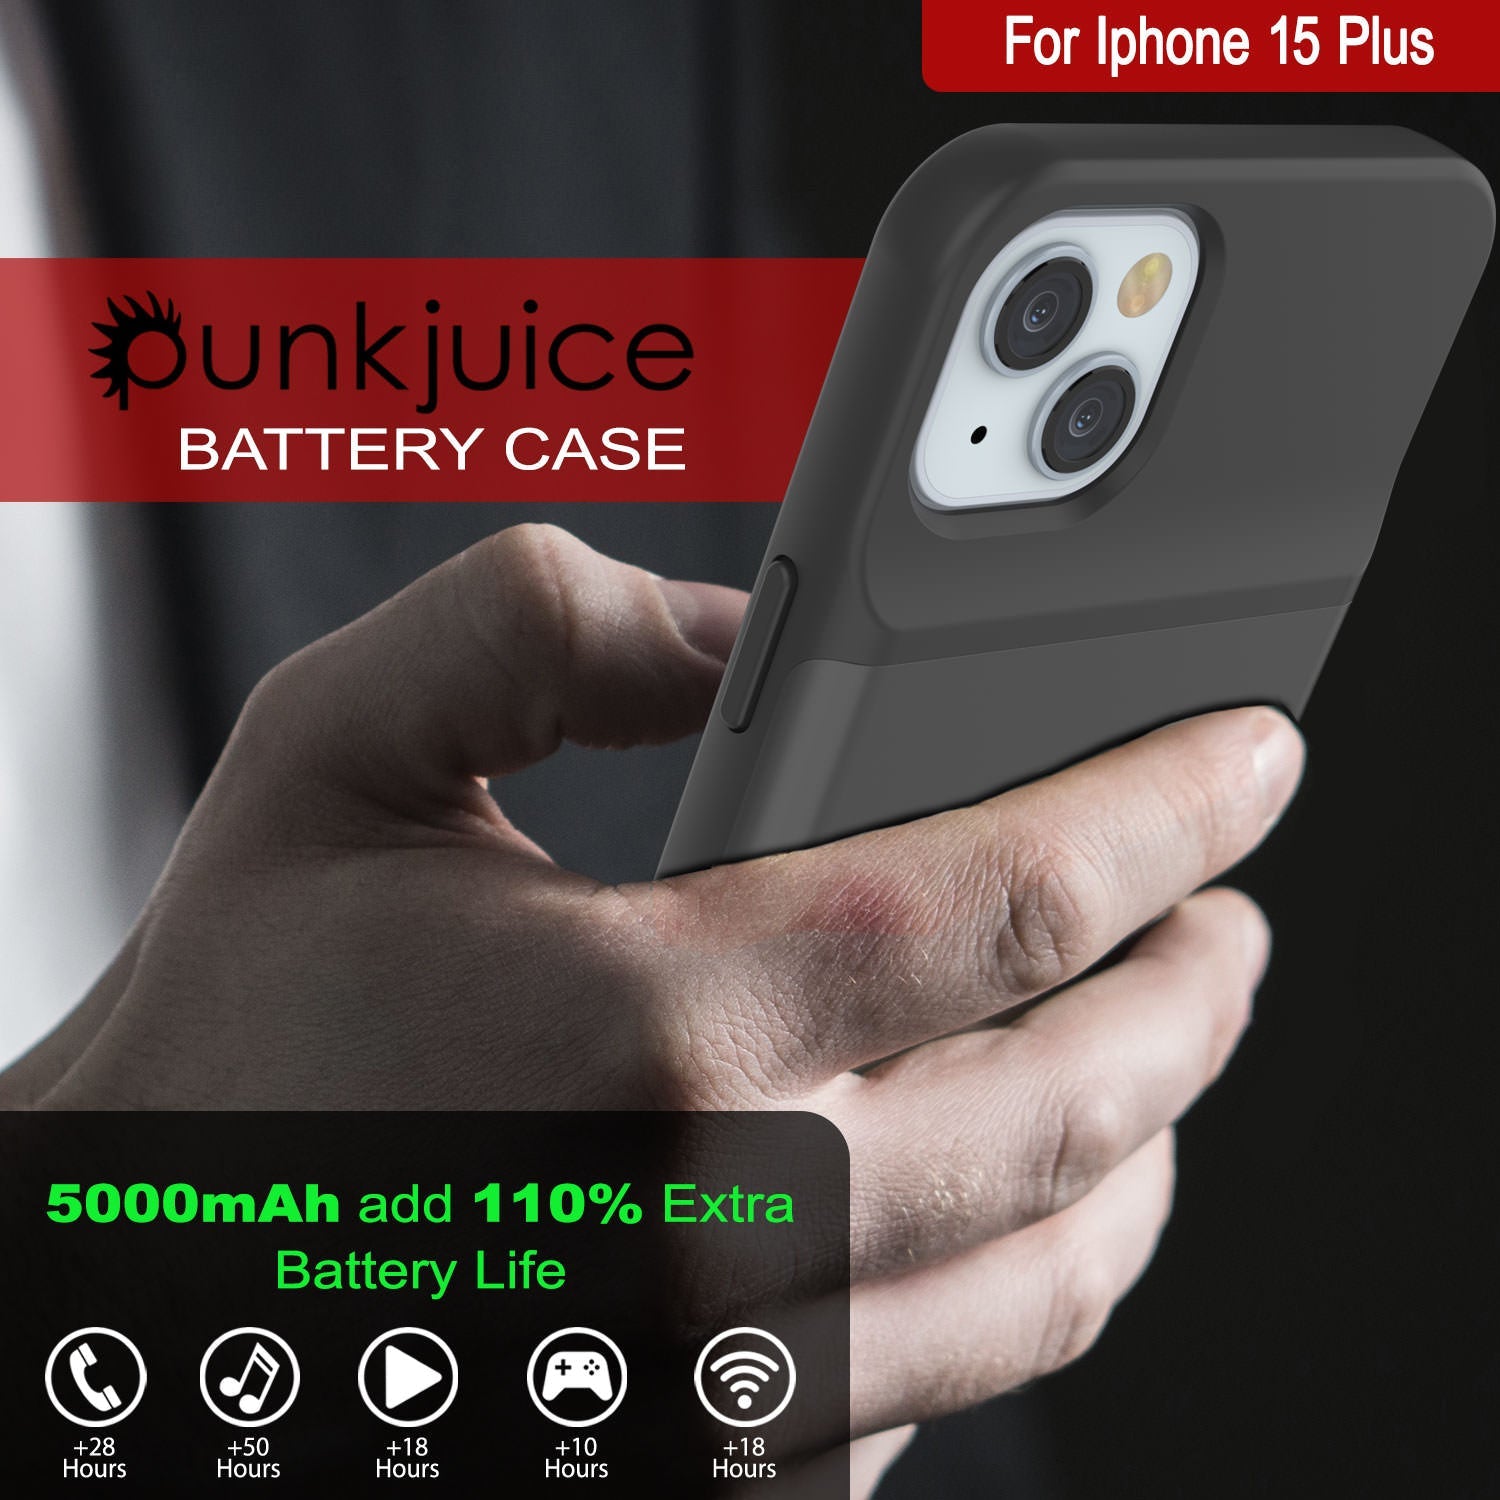 iPhone 15 Plus Battery Case, PunkJuice 5000mAH Fast Charging Power Bank W/ Screen Protector | [Grey]